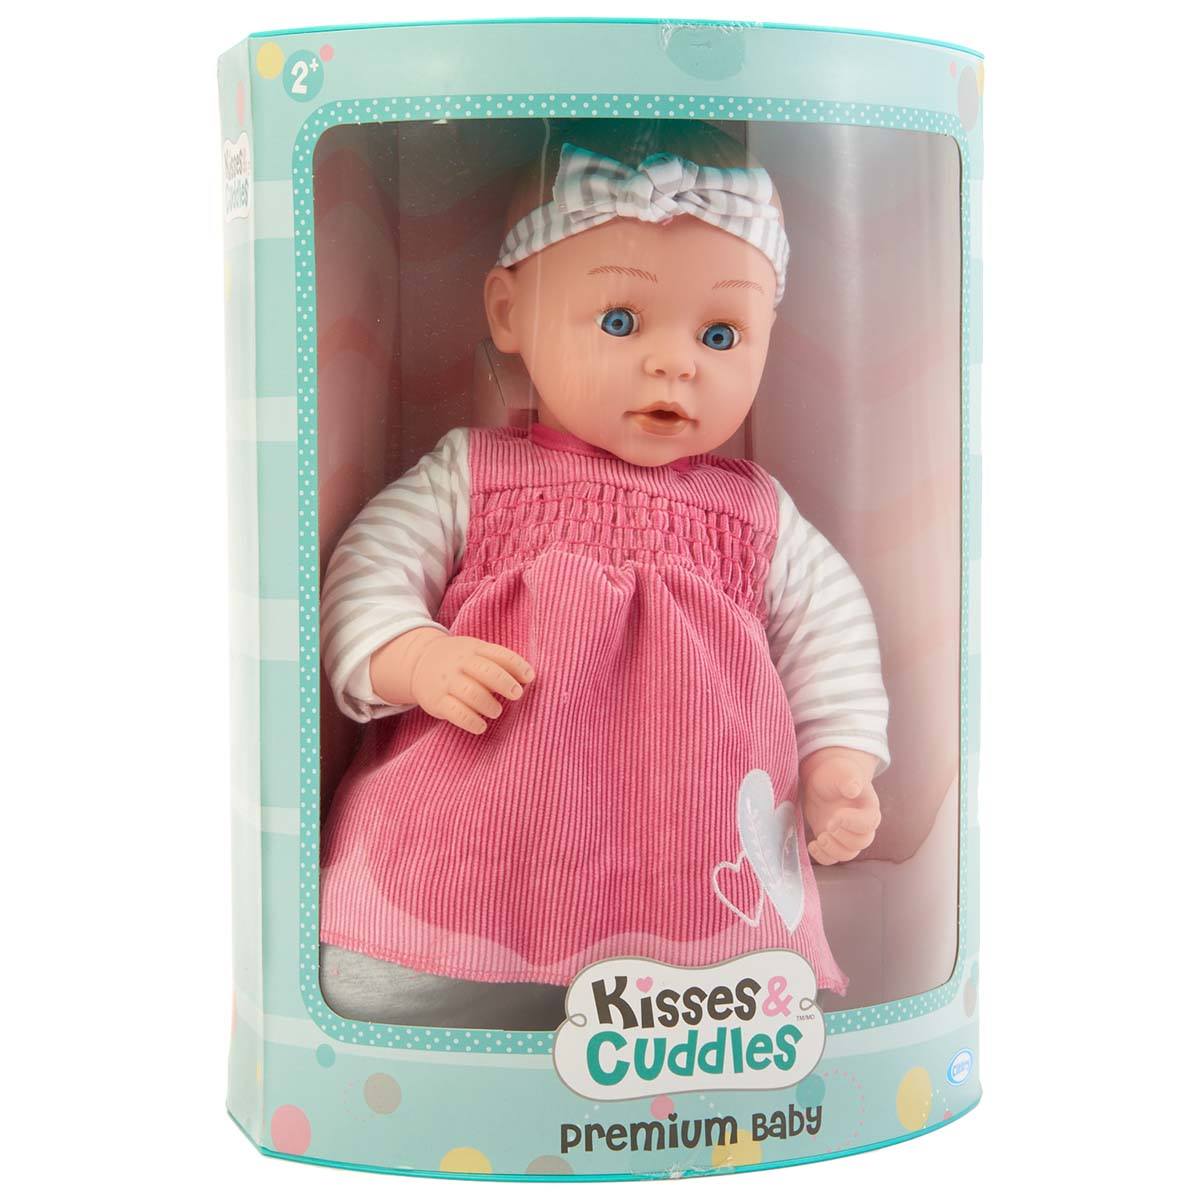 Kisses & Cuddles 18in. Soft Baby Doll